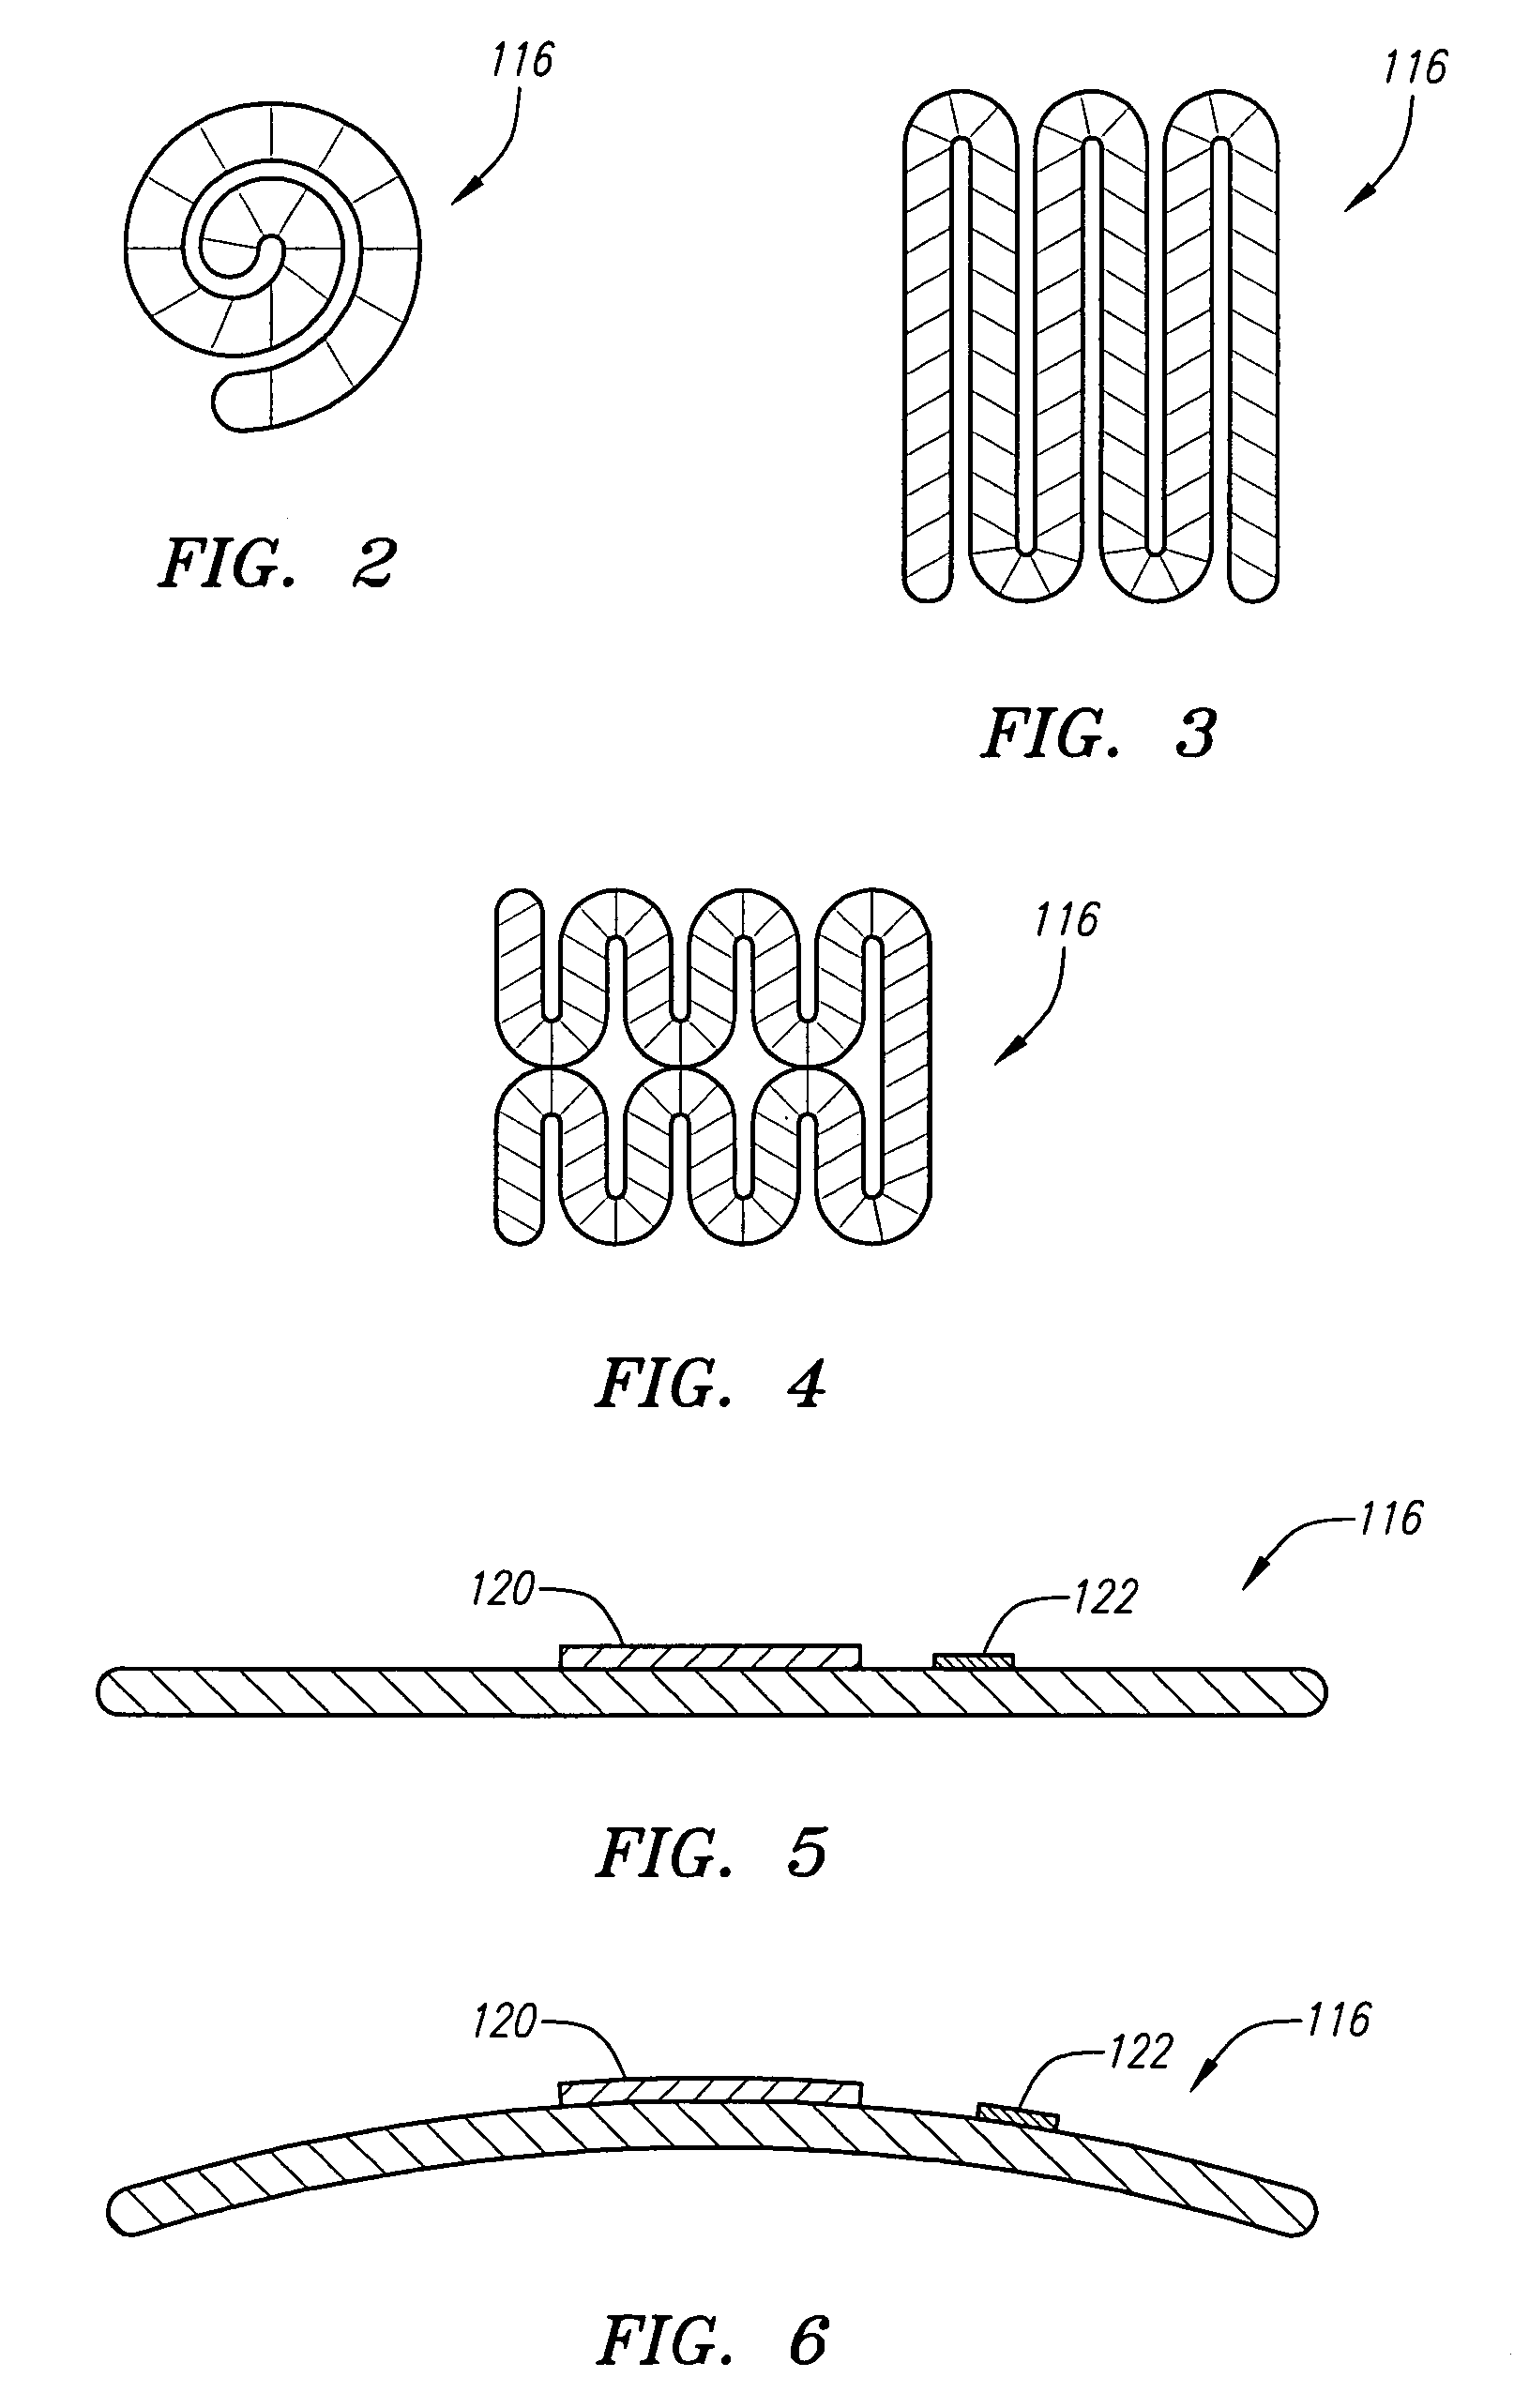 Collapsible/expandable electrode leads